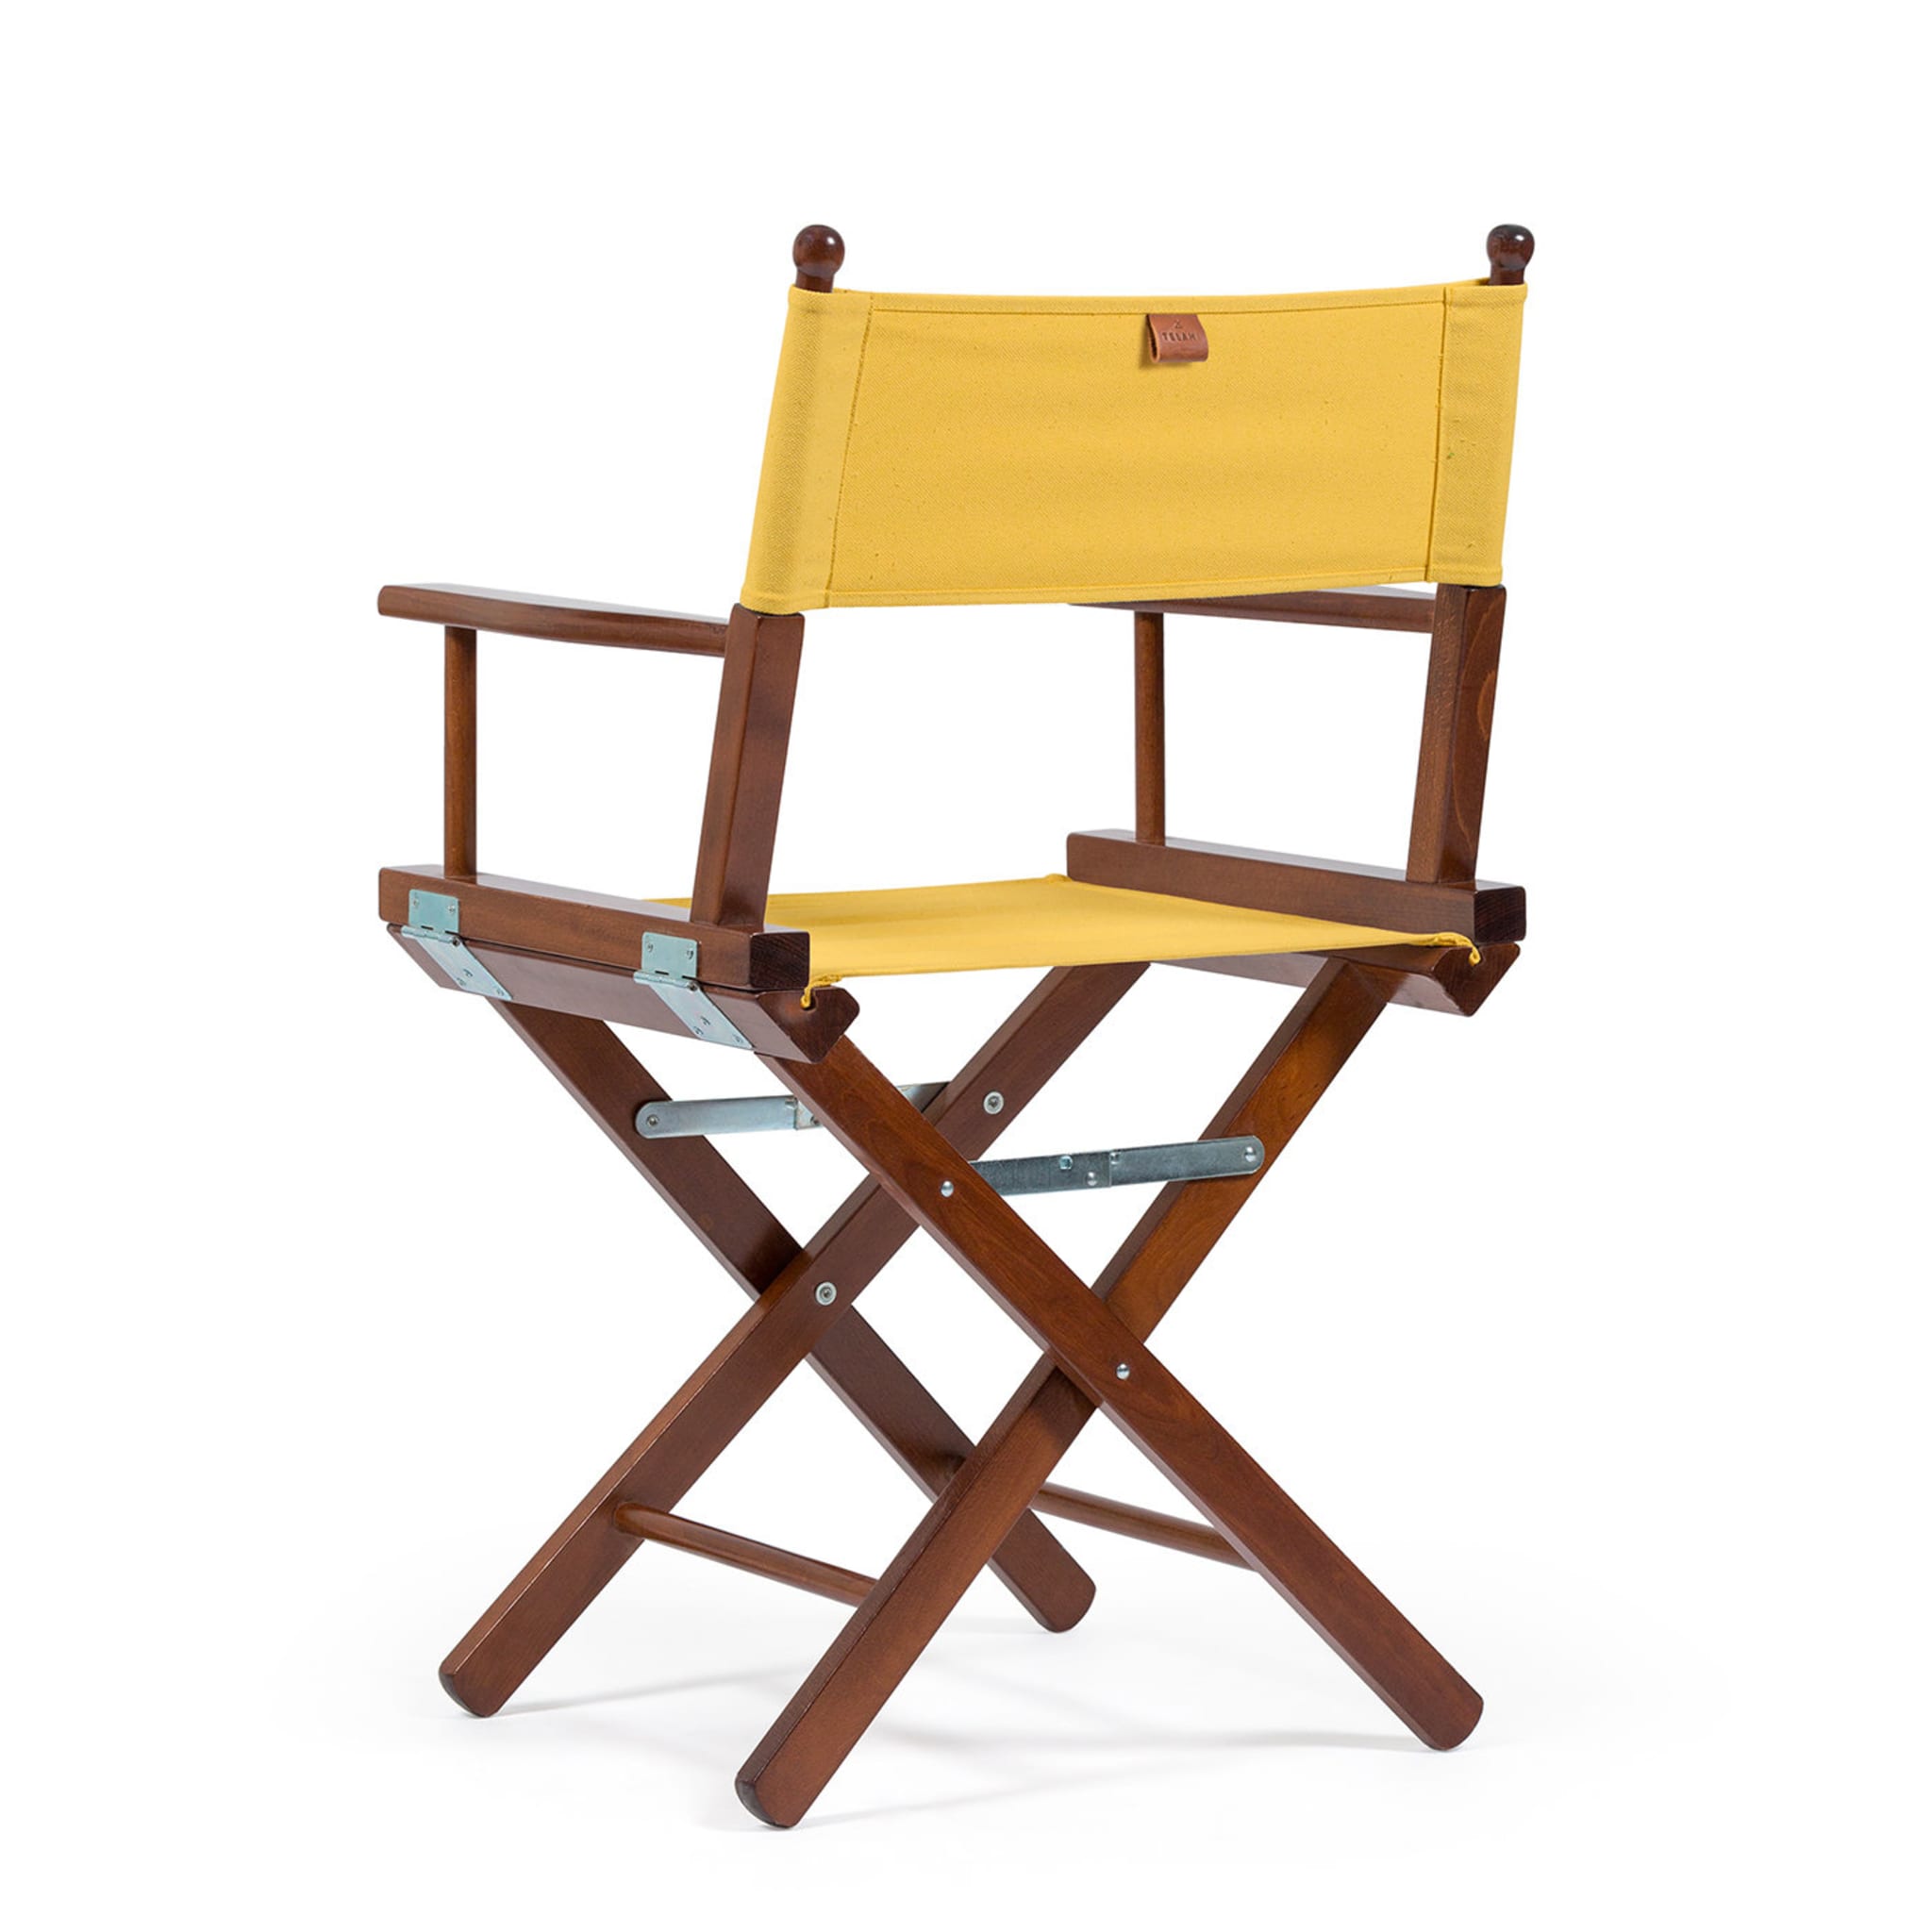 Director's Chair in Mustard Yellow - Alternative view 2